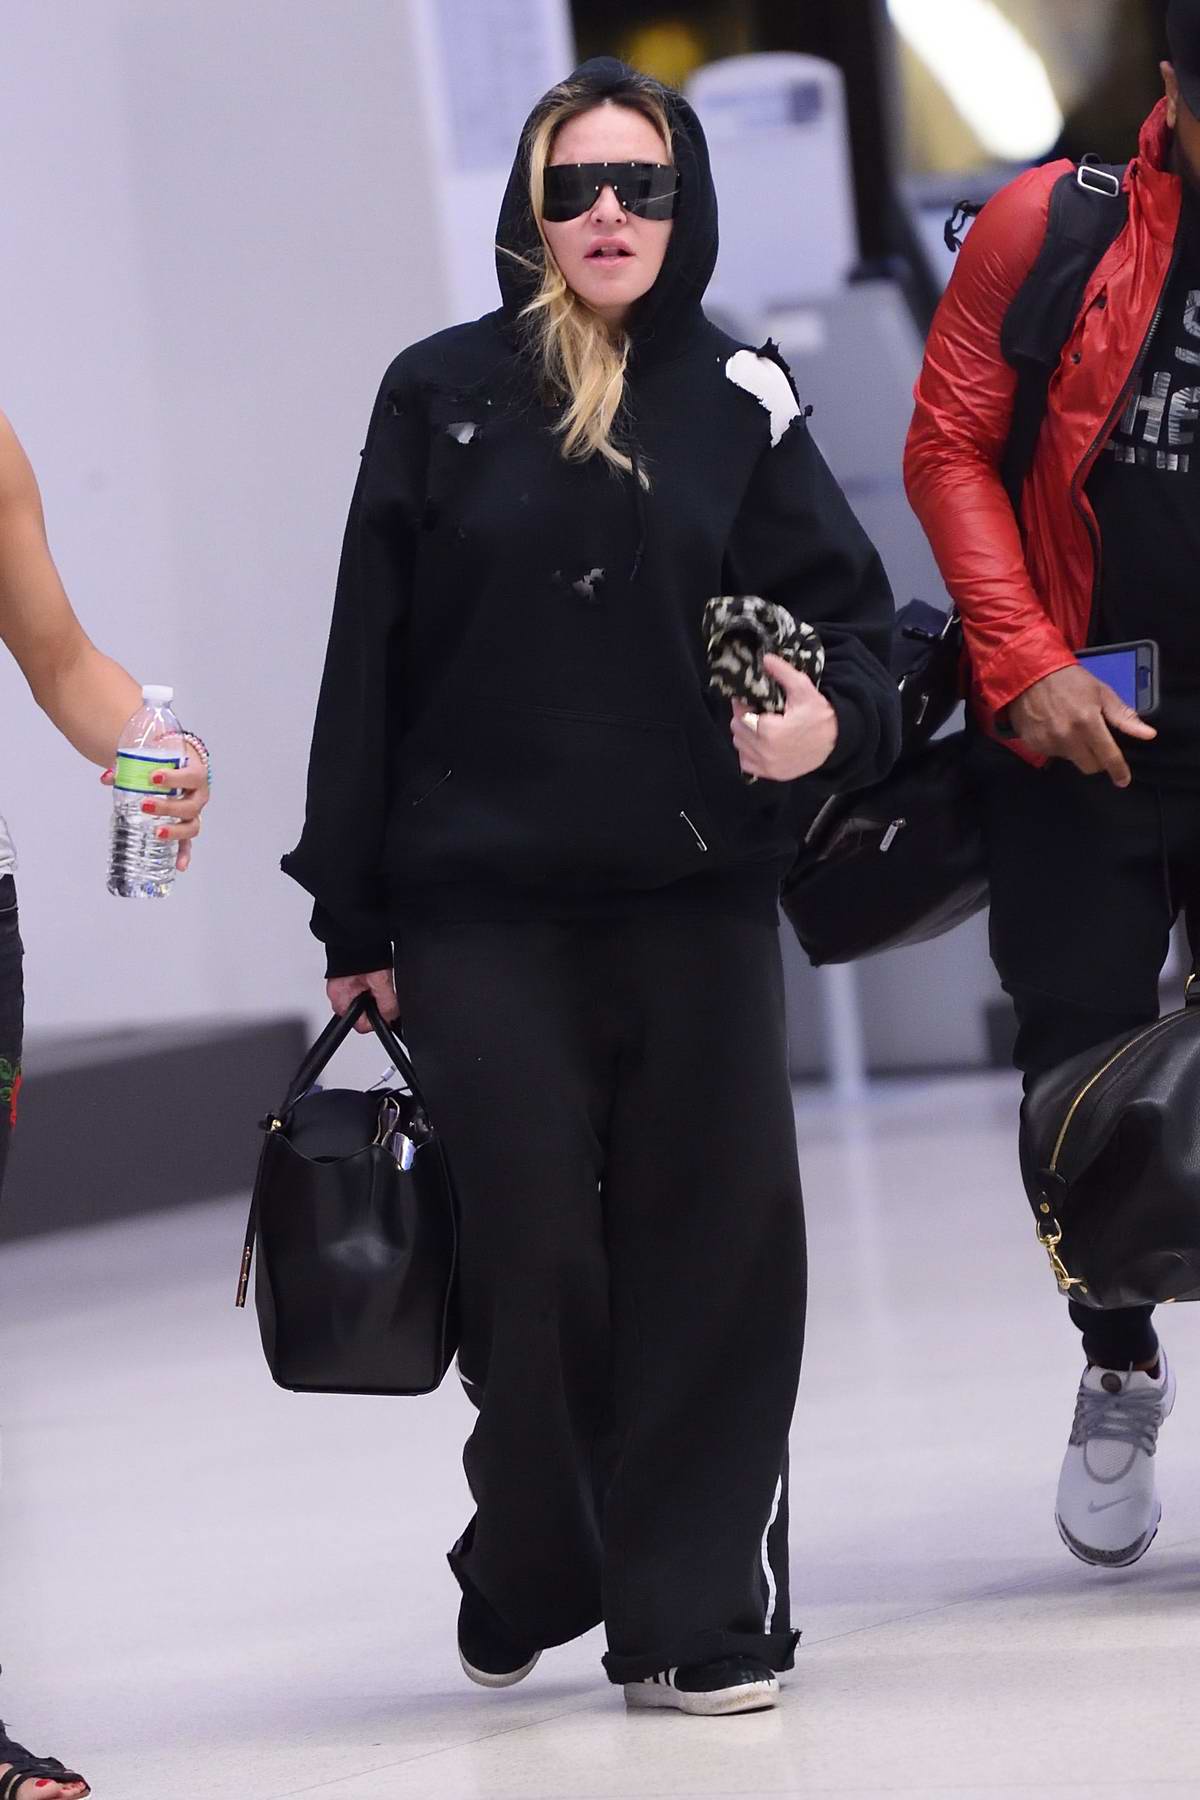 Madonna's in Louis Vuitton's Funky Sandals, Tracksuit at JFK